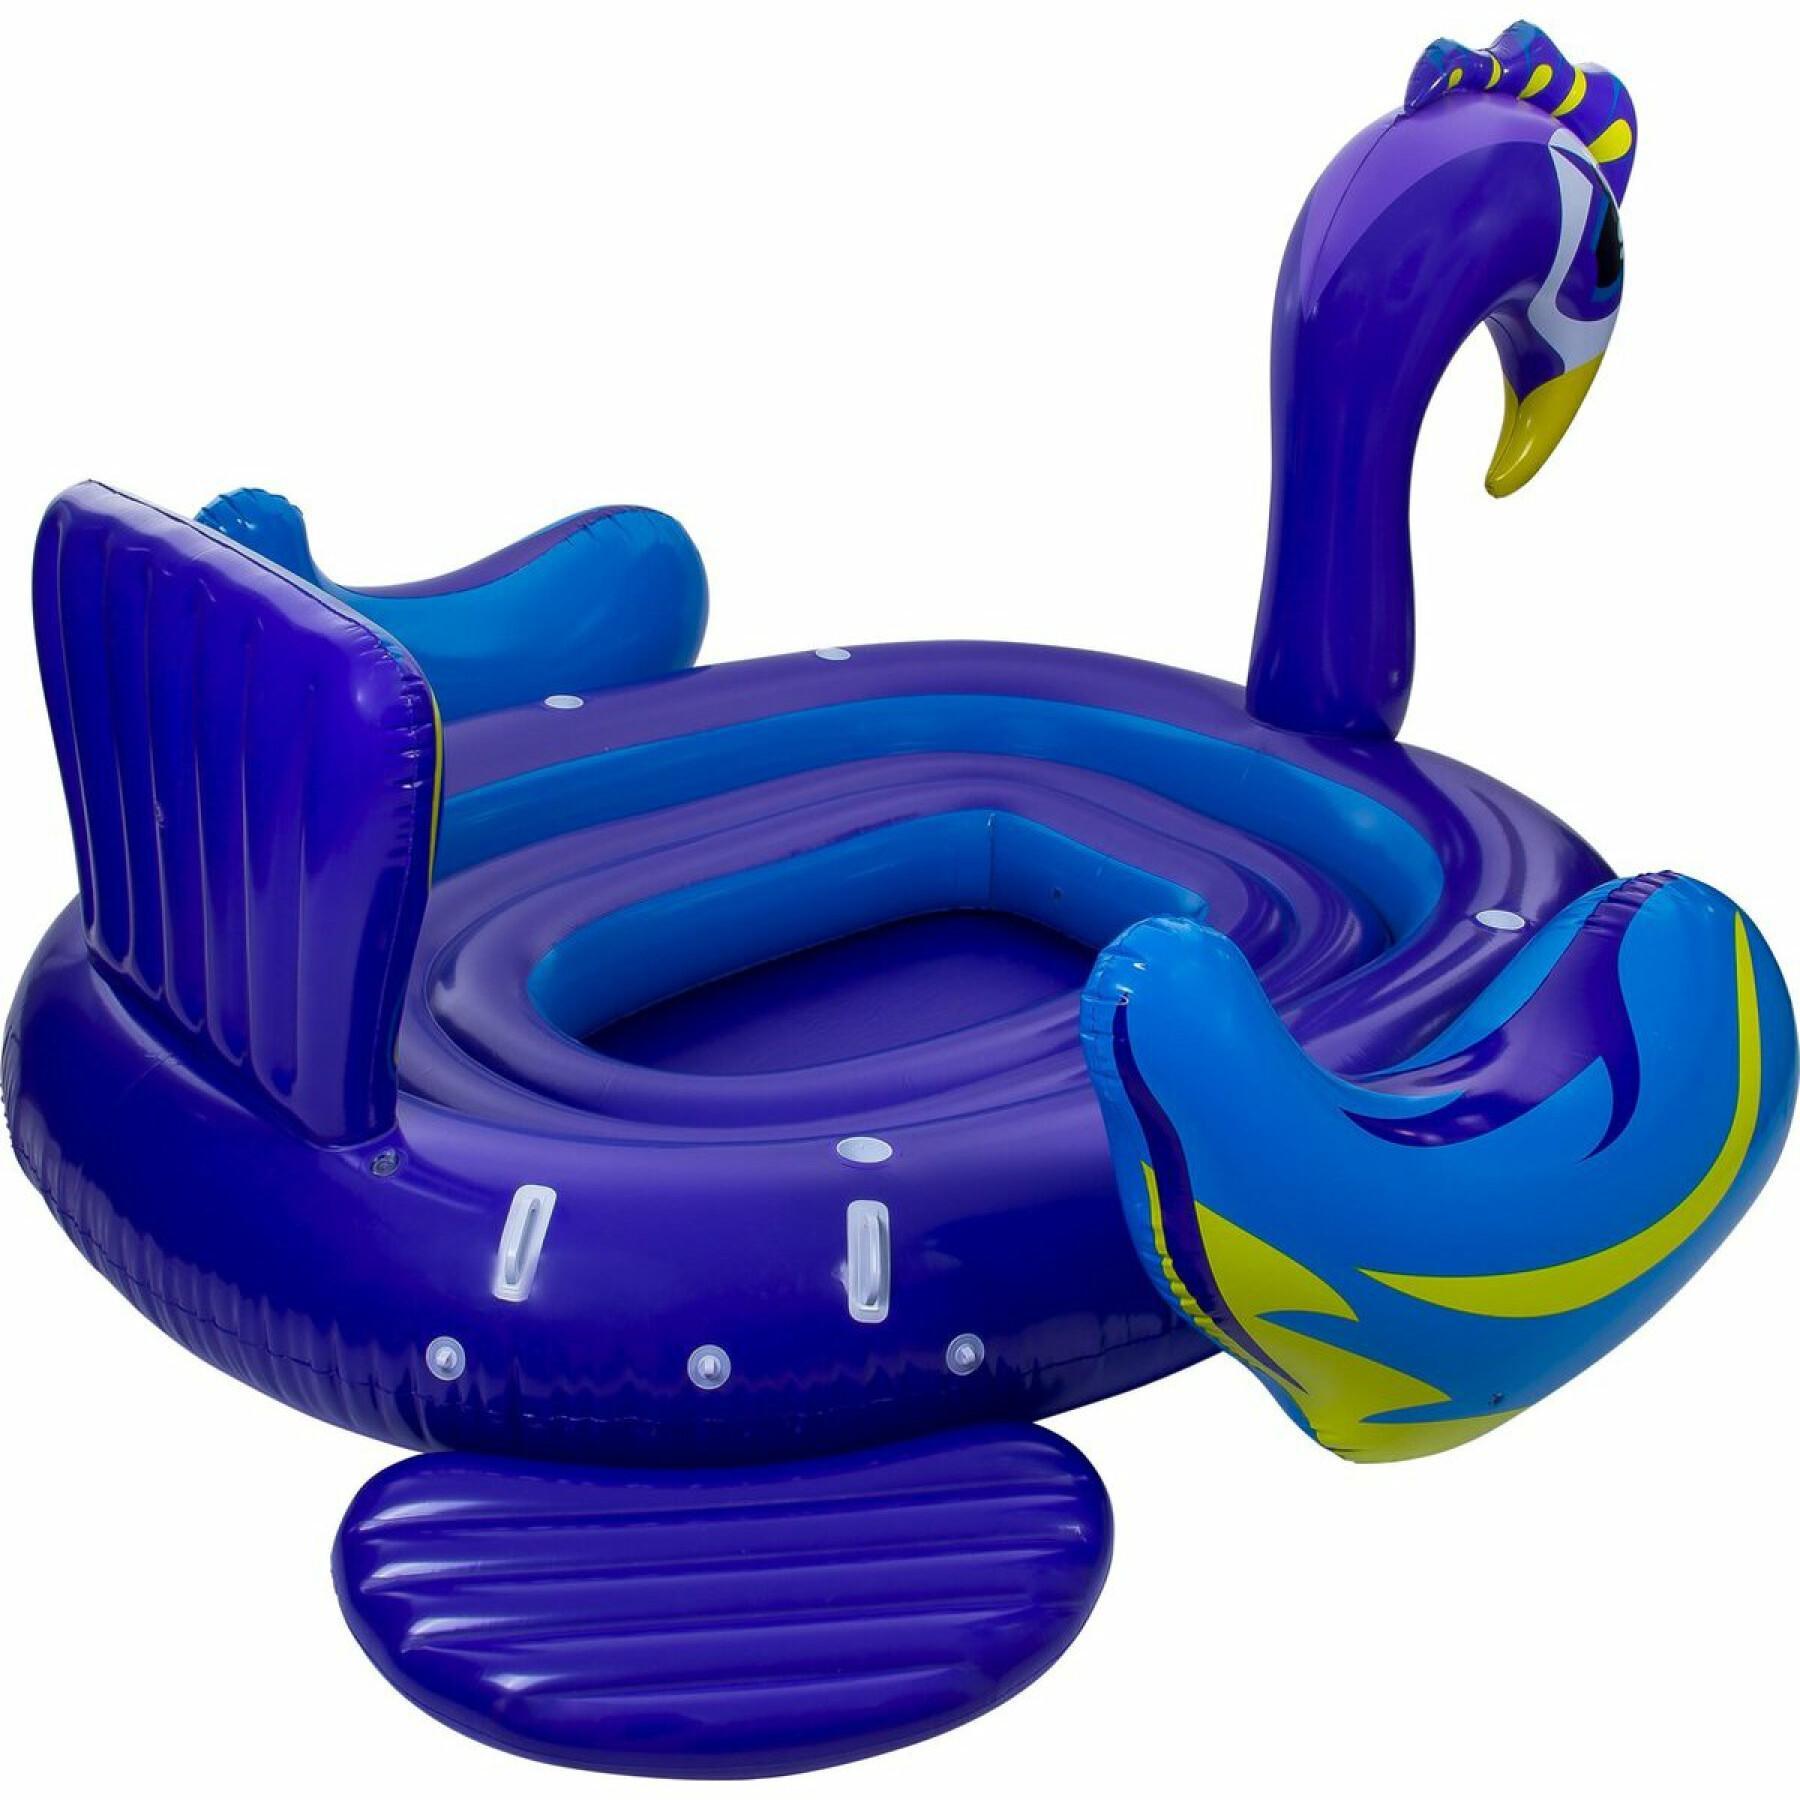 Barco inflable el Pure4Fun Paon